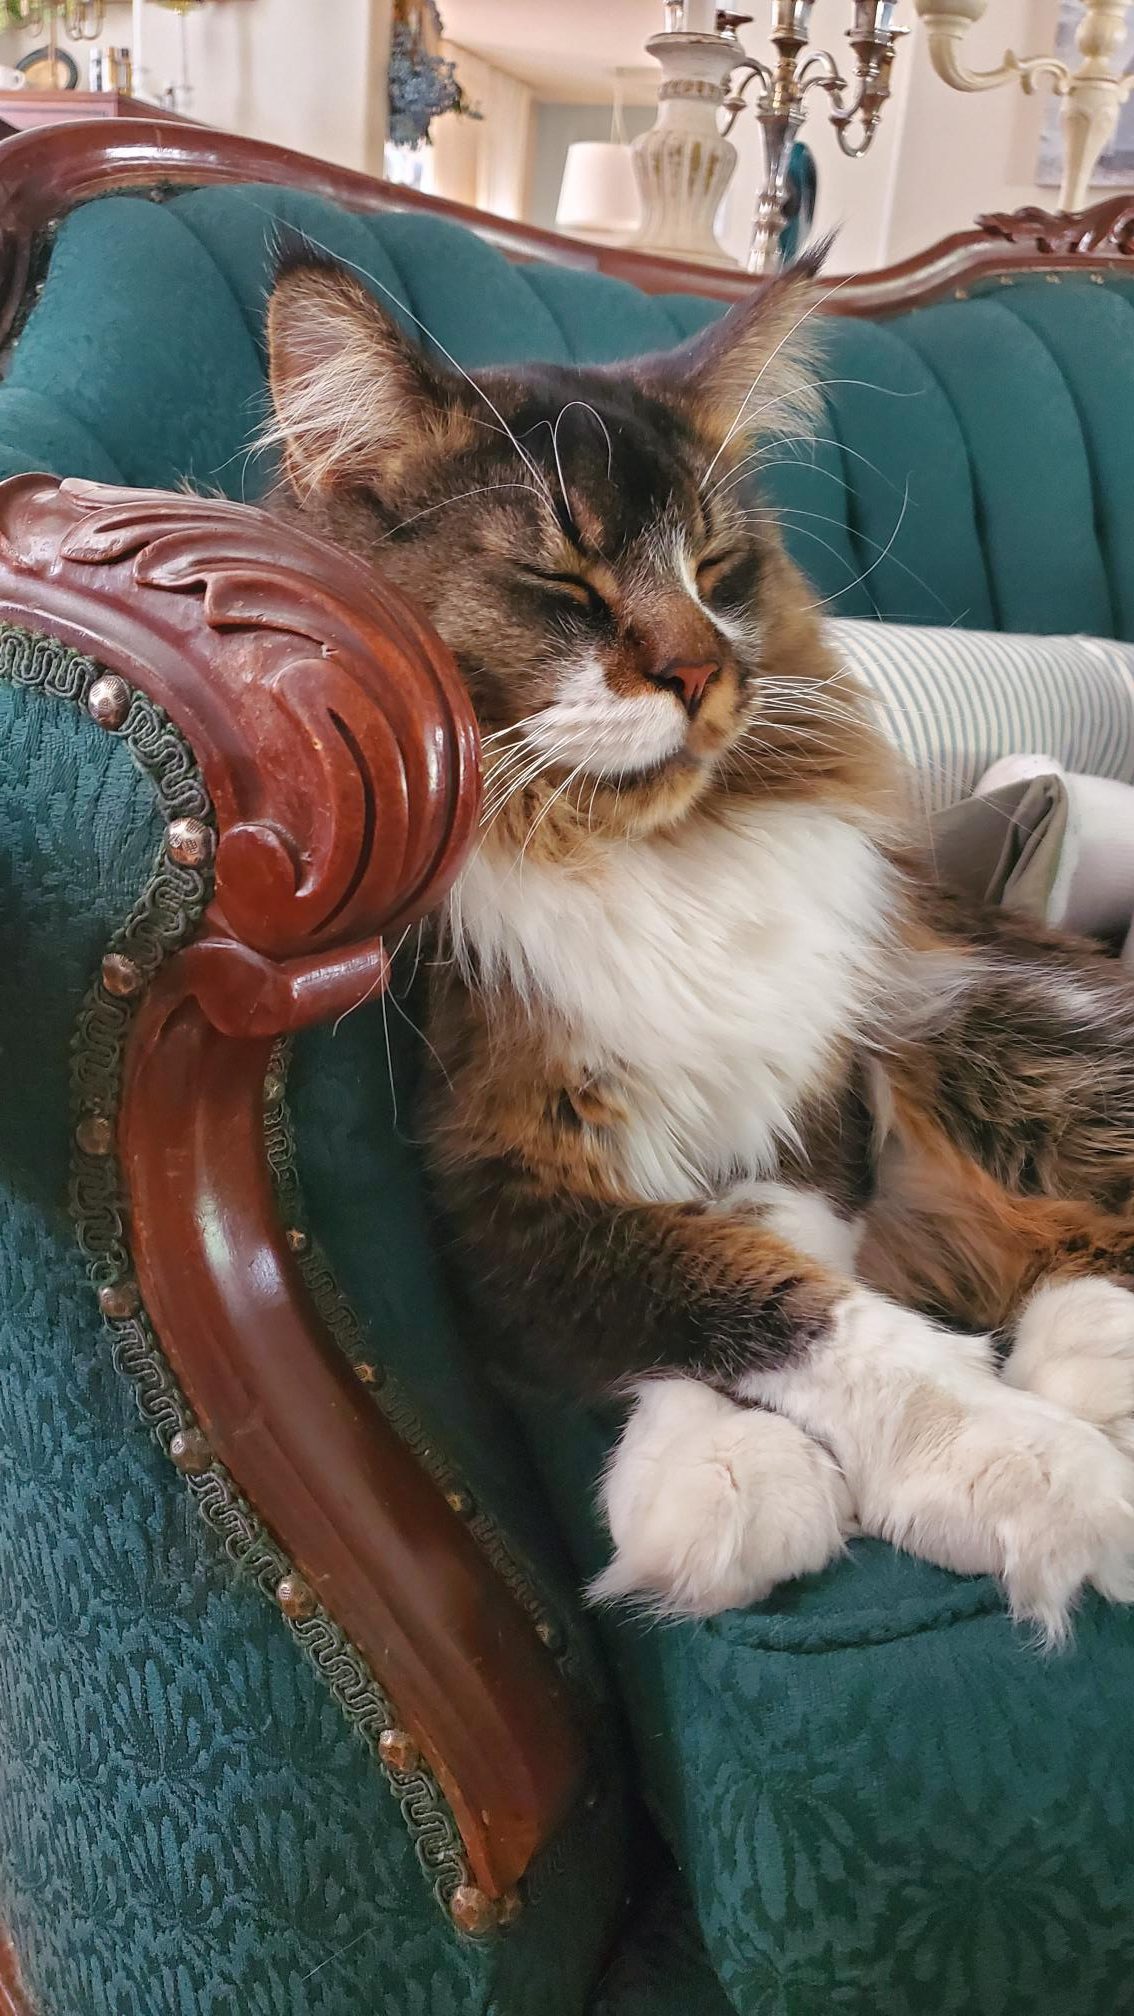 Winston, our Maine Coon cat, taking a nap on a Victorian sofa.